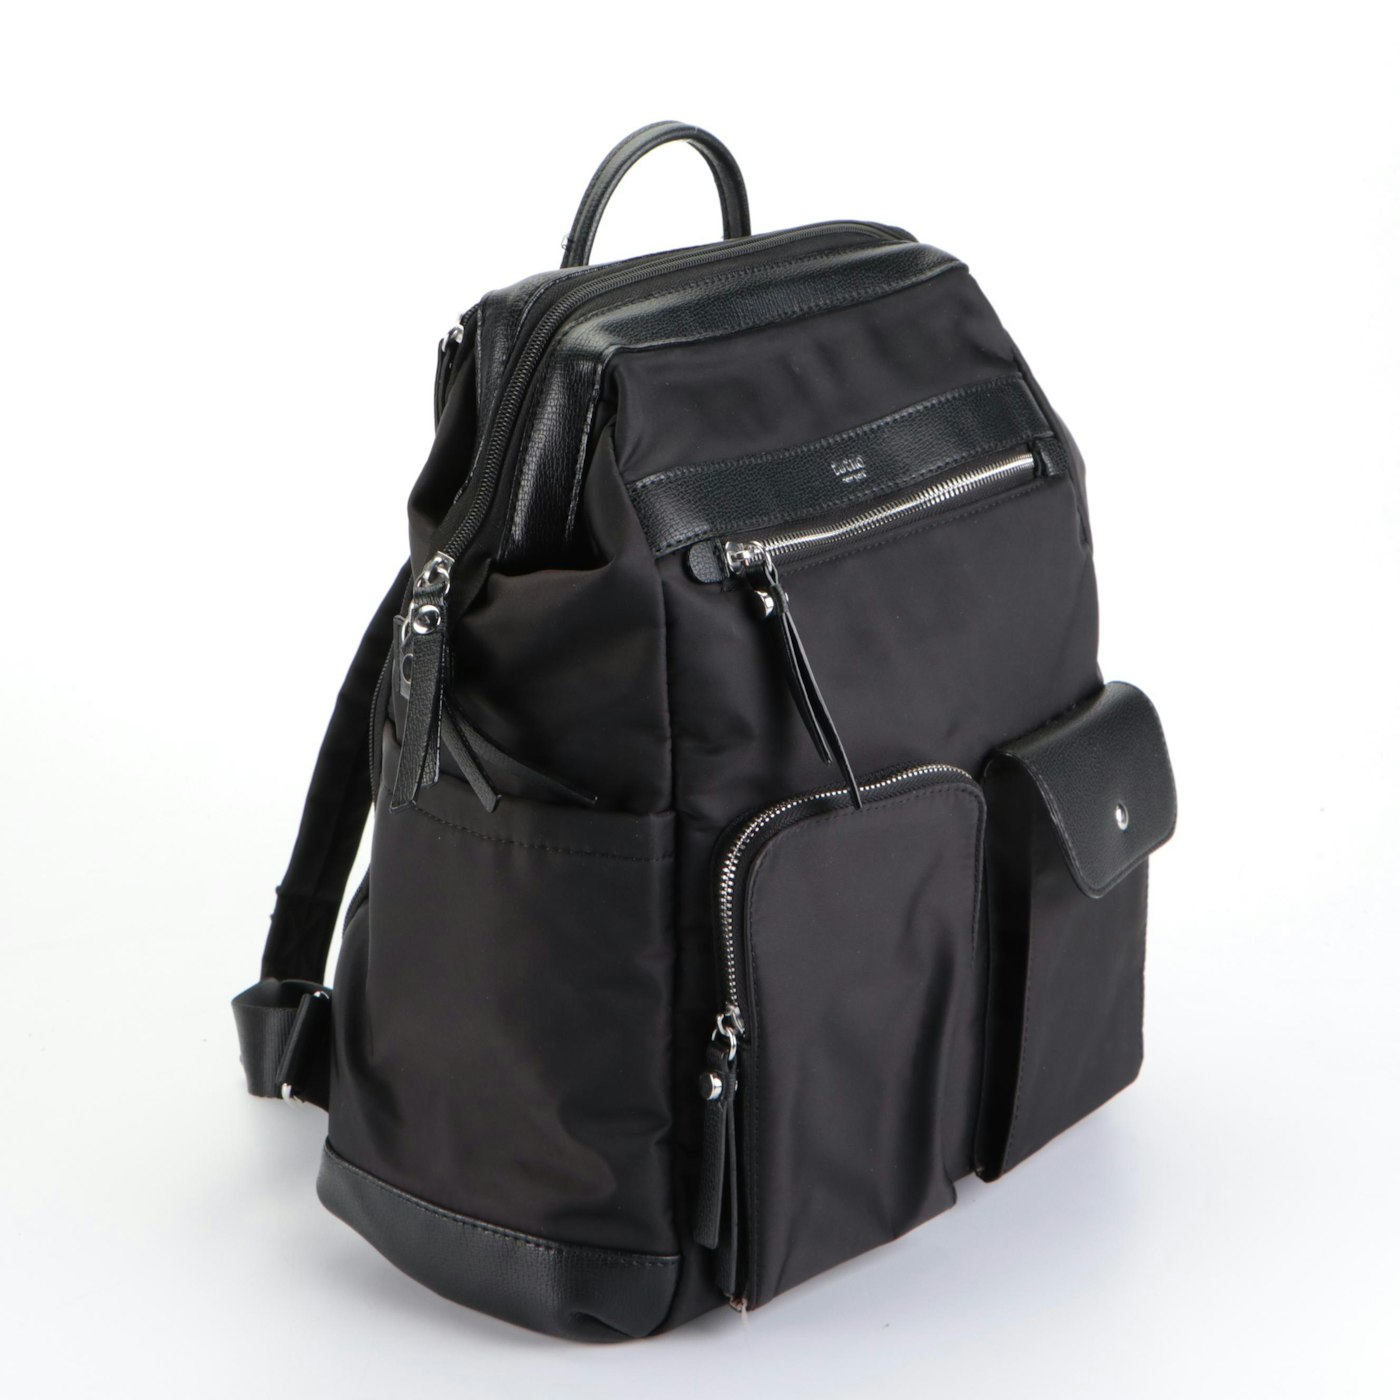 Tutilo Backpack in Black Nylon and Black Faux Leather Trim | EBTH